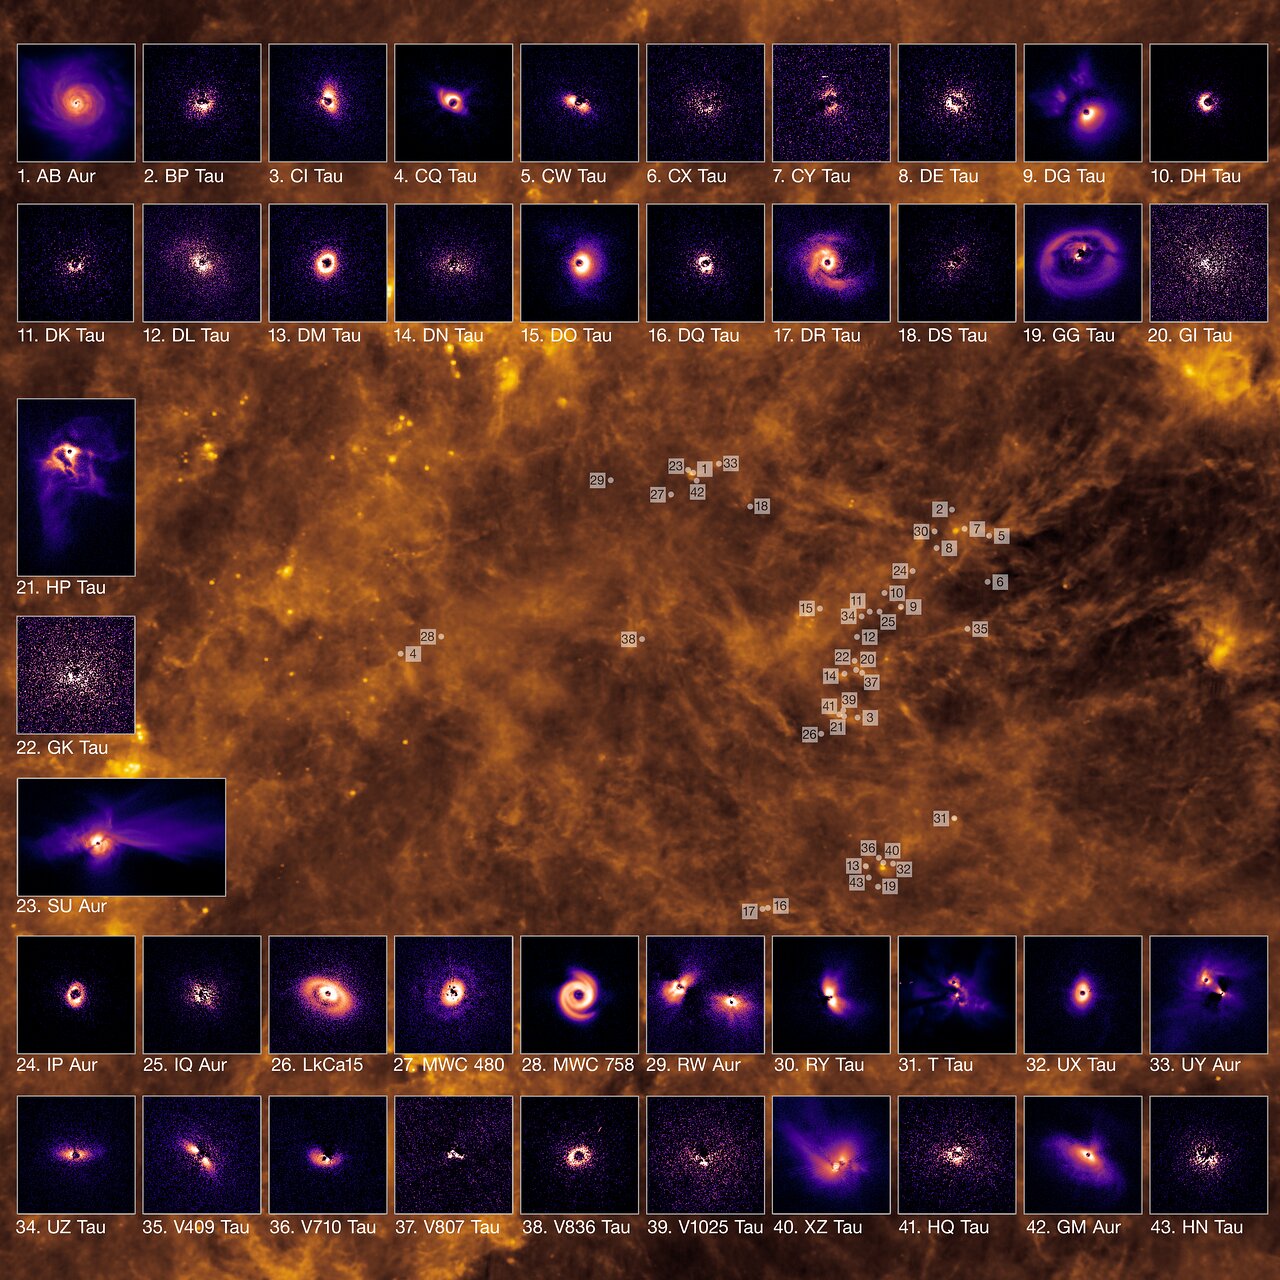 More images of planet forming disks in purple hues with a background showing where they were found. It's the cloud that looks mustard yellow.